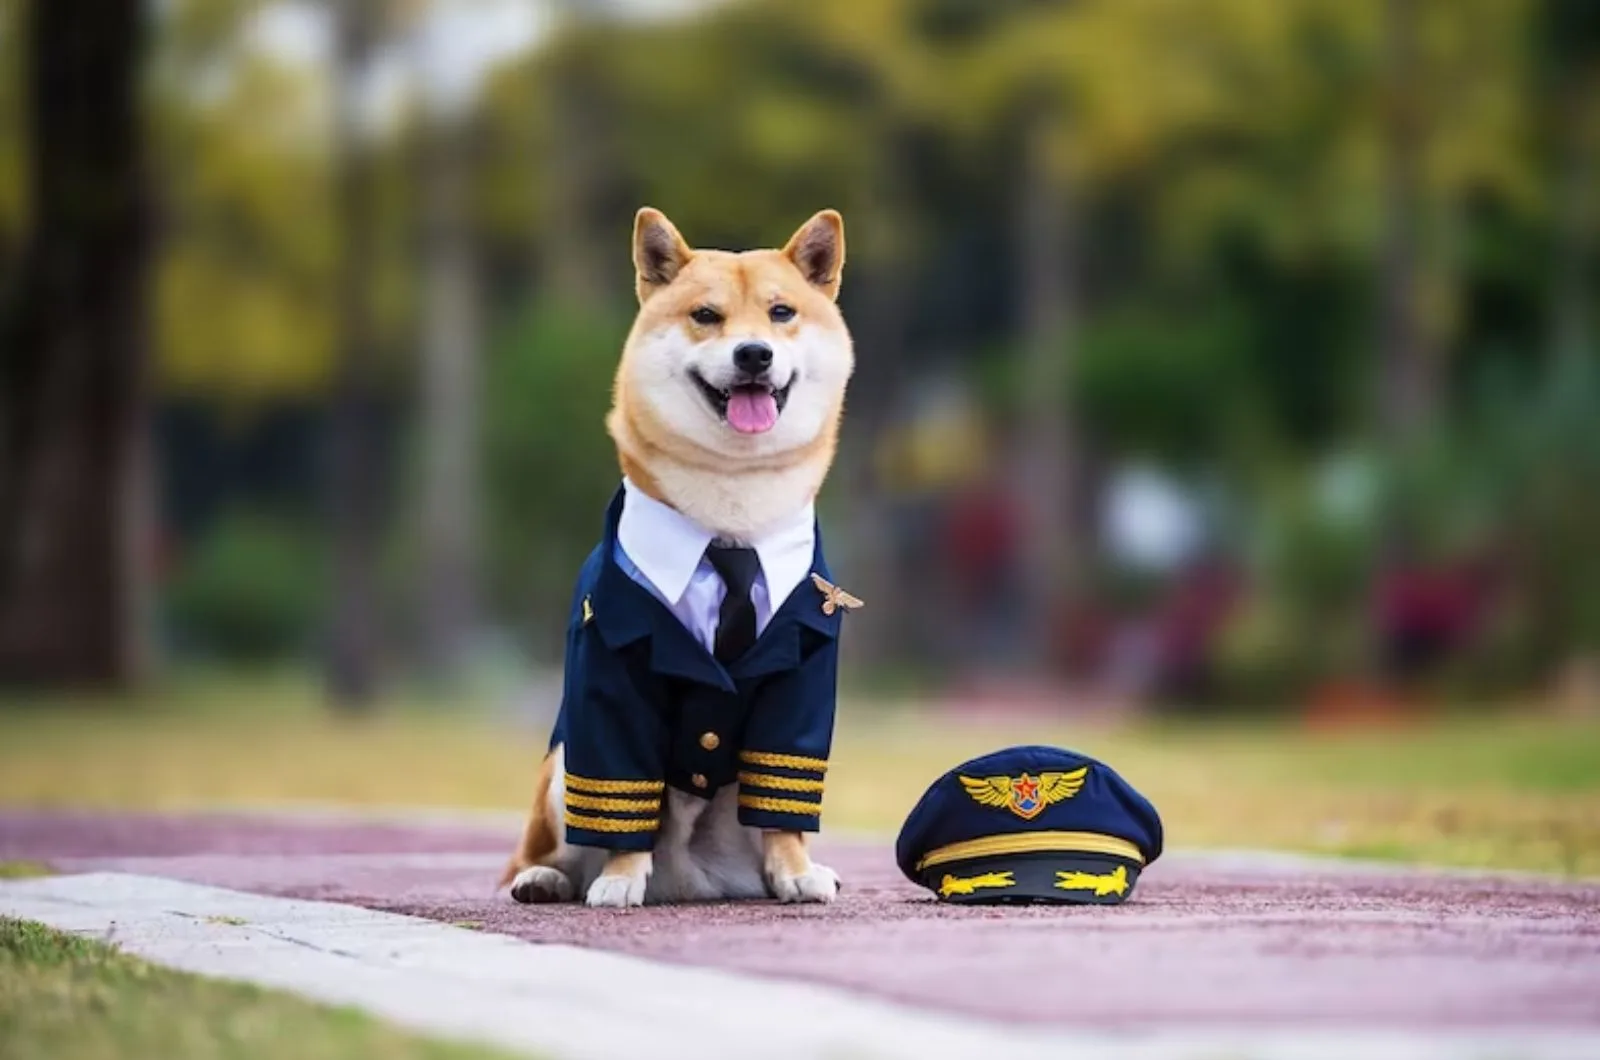 dog wearing pilot costume sitting in the park